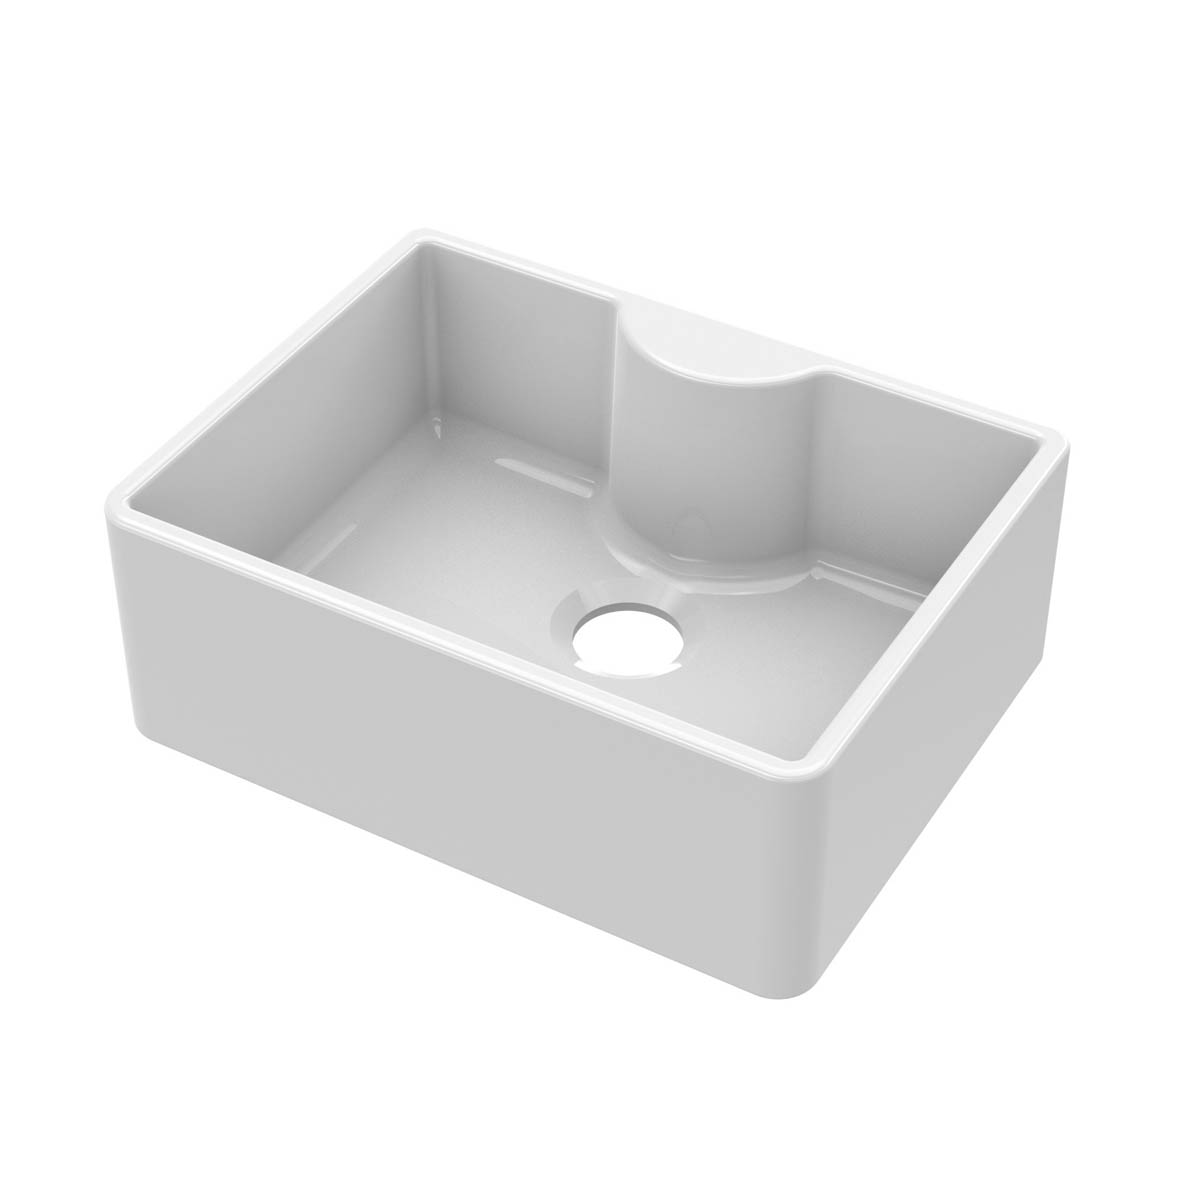 Nuie Butler 595x450x220mm Fireclay Sink with Central Waste & Tap Ledge - White (20285)